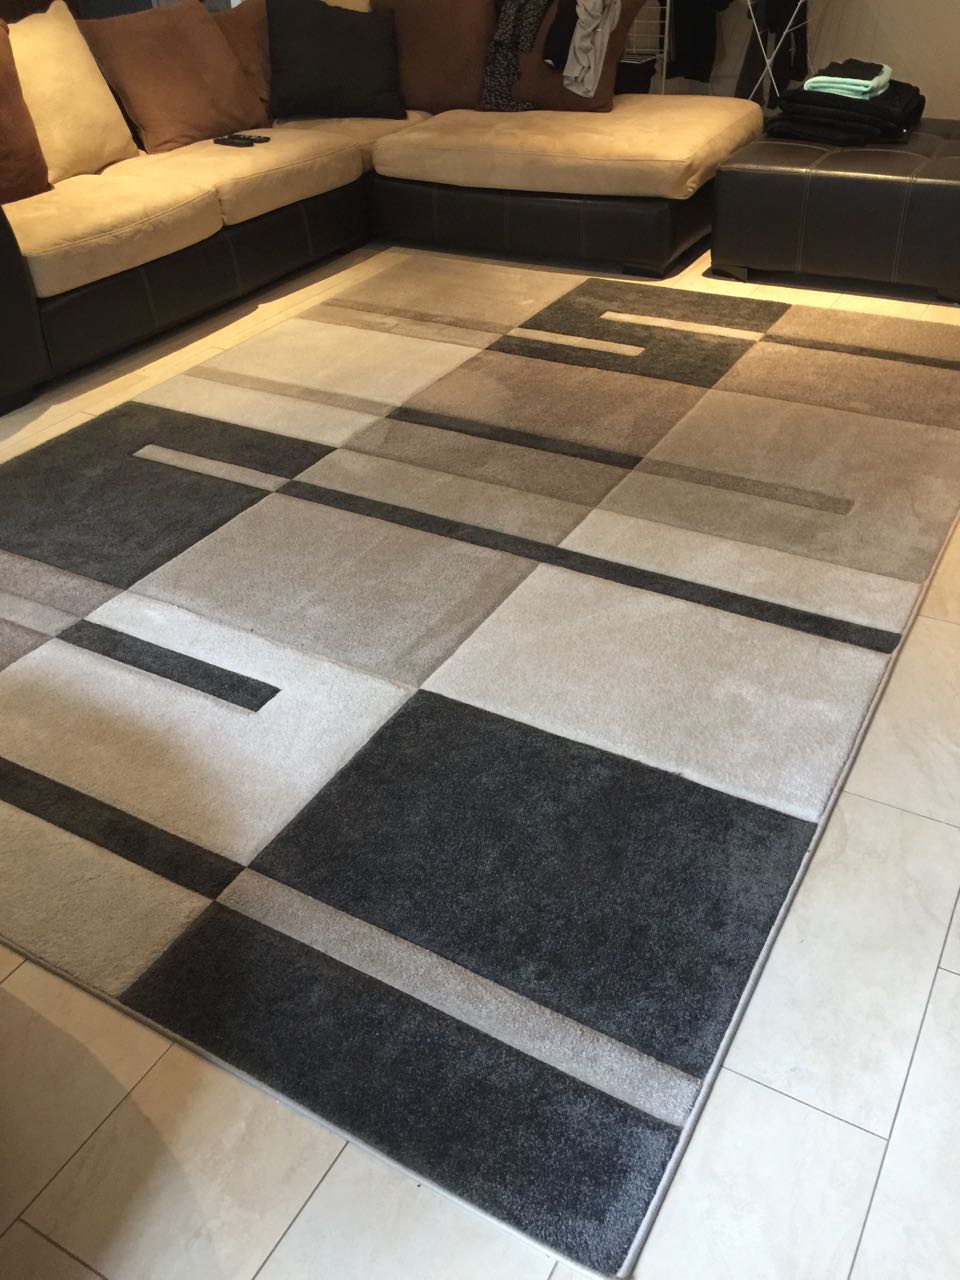 This Enfield client contracted us for their home's carpet cleaning using the low pressure technique